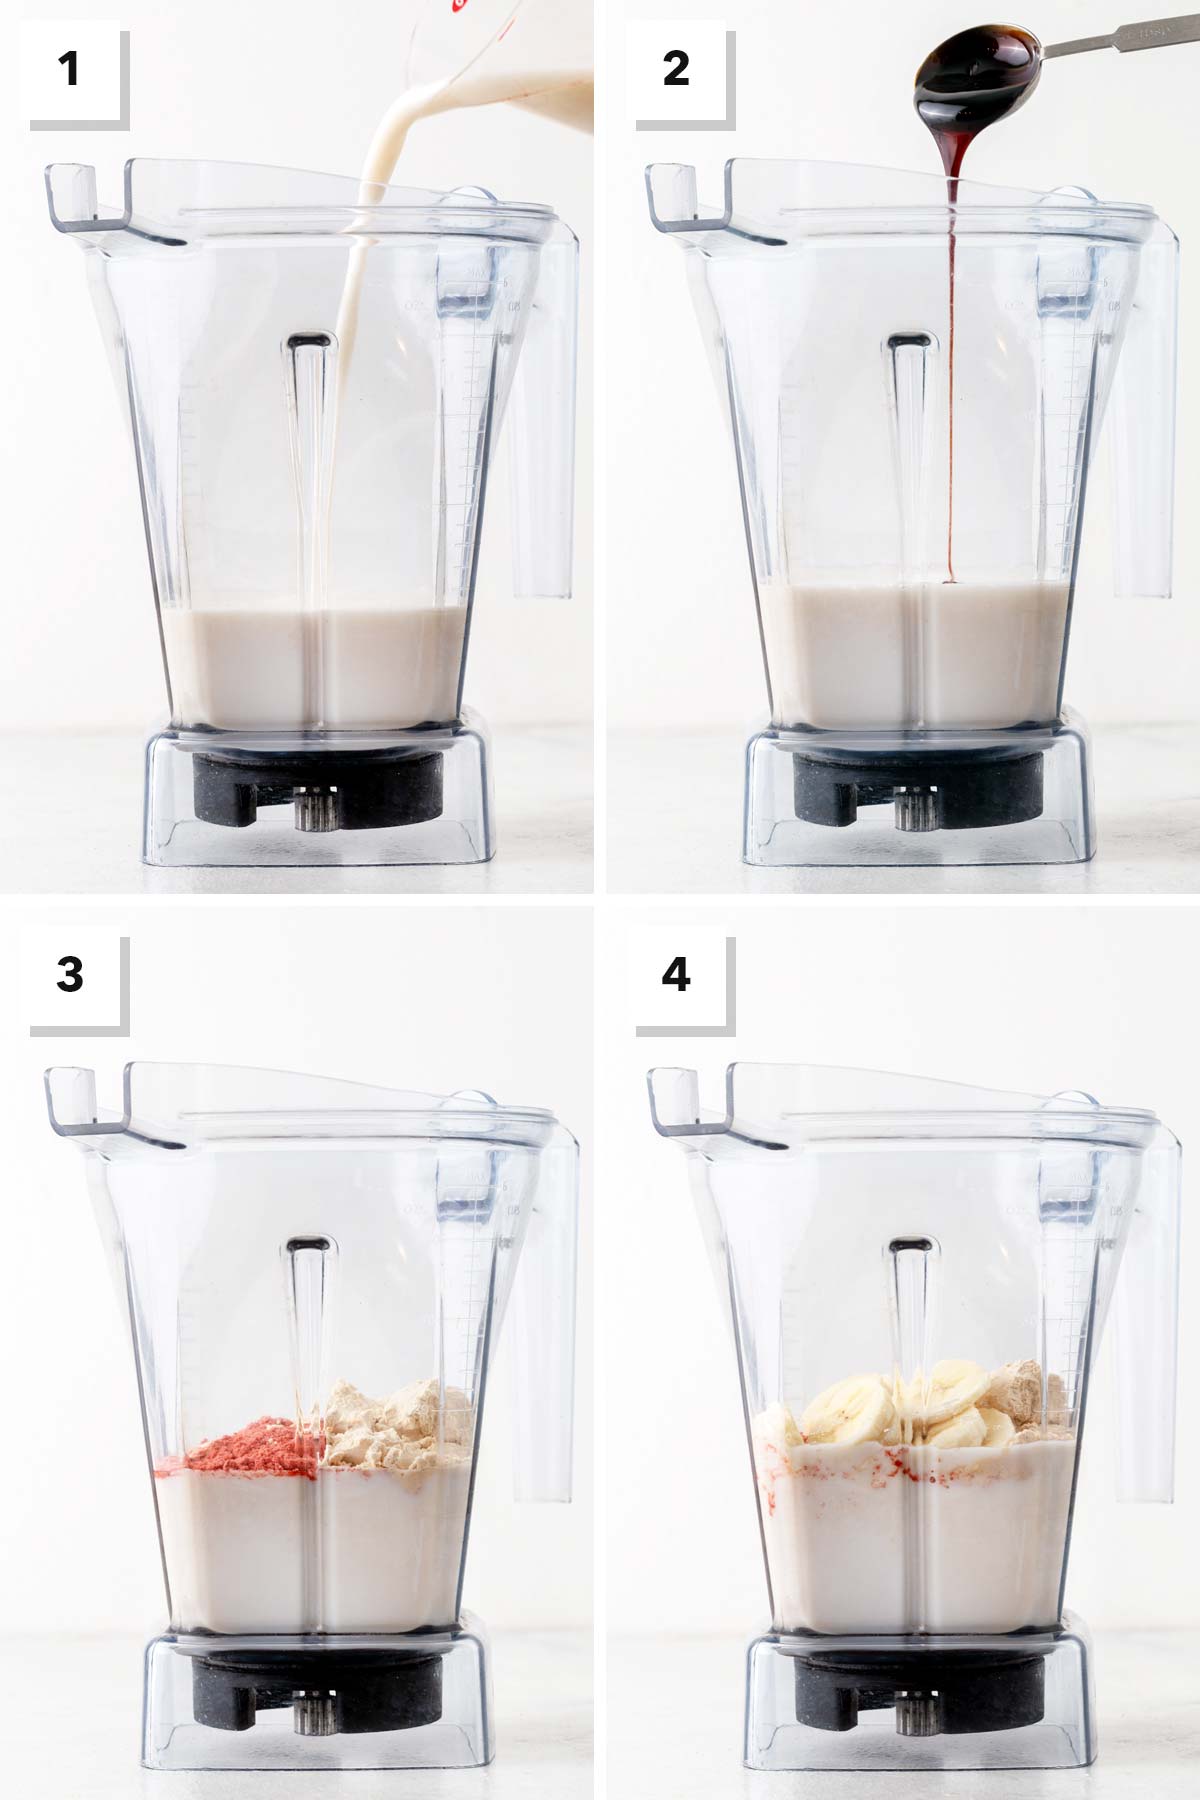 Steps for making a strawberry banana protein shake.